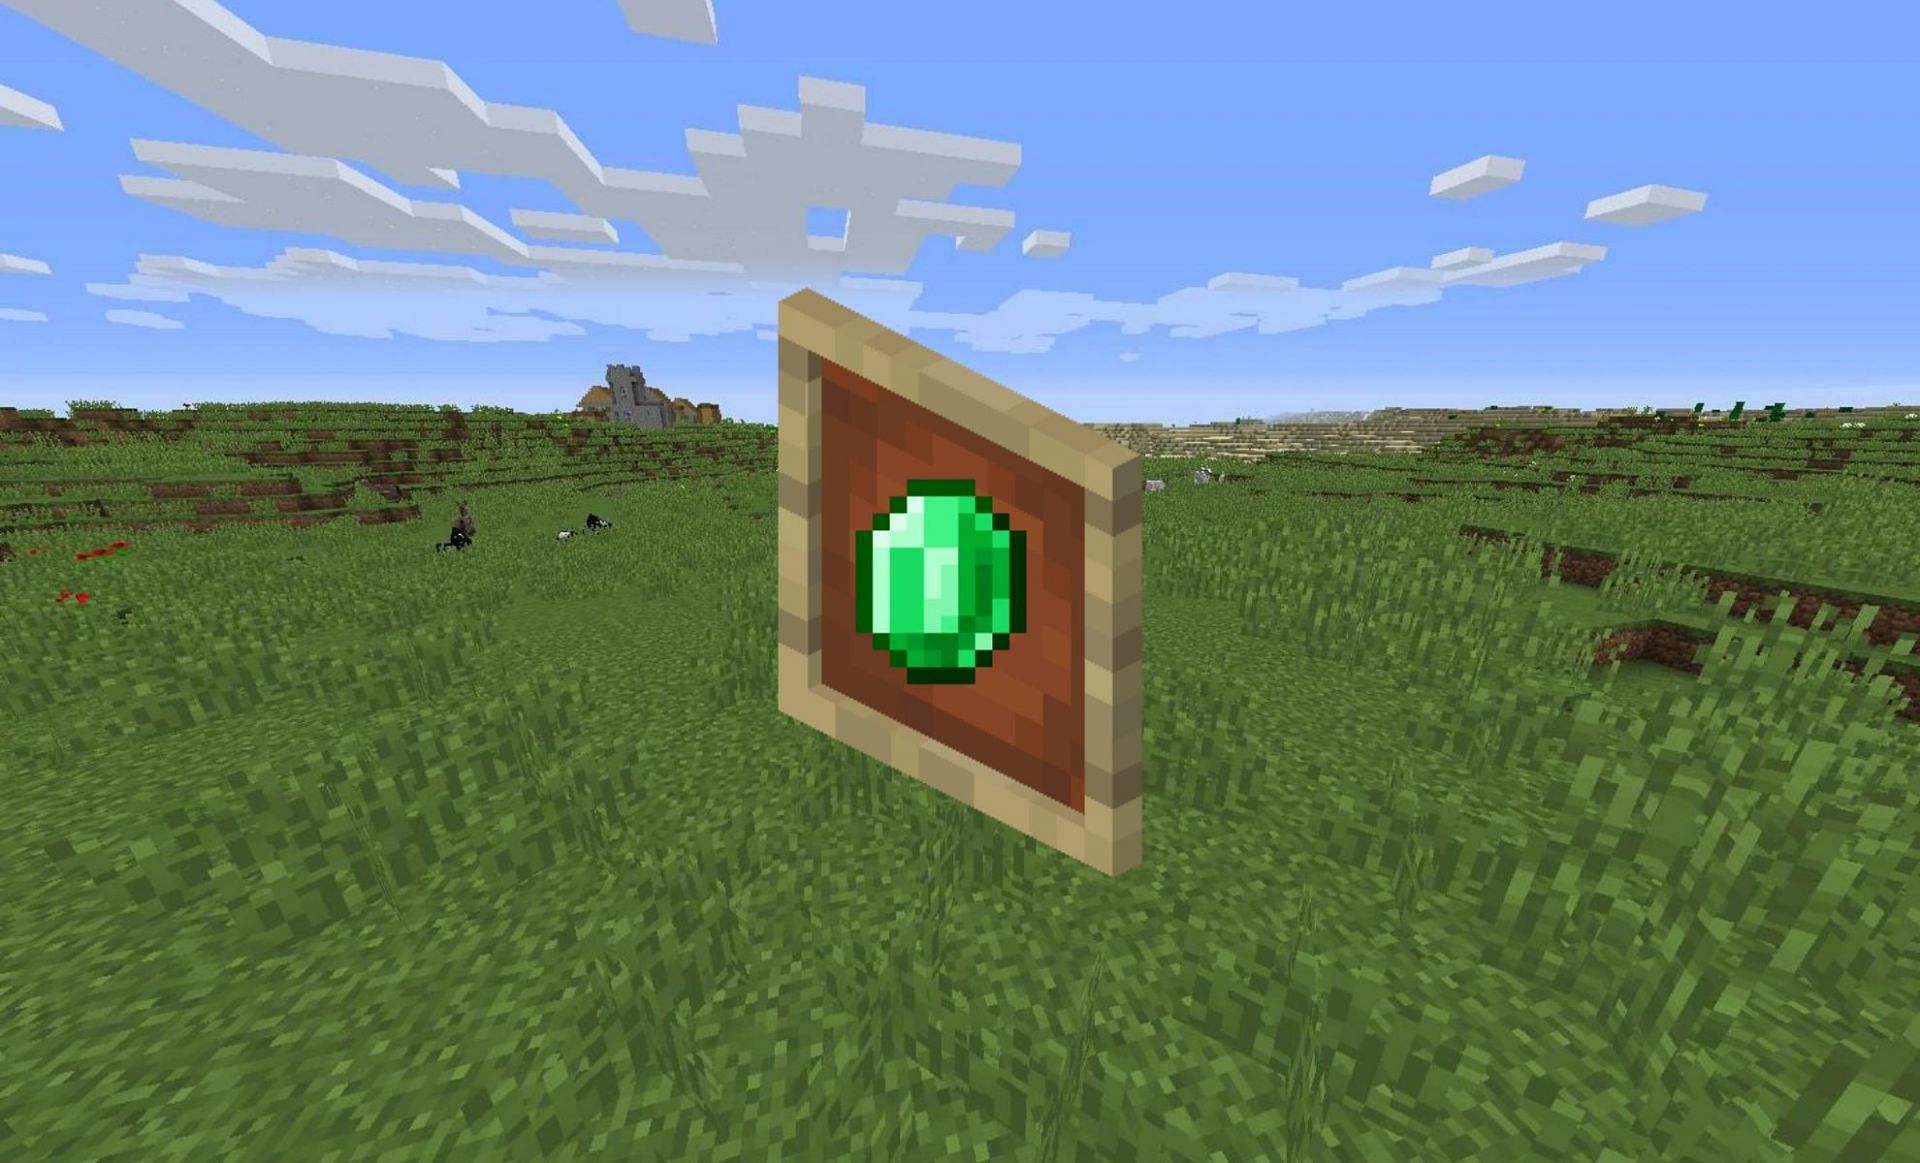 Emerald in an item frame (Image via Minecraft Wiki)